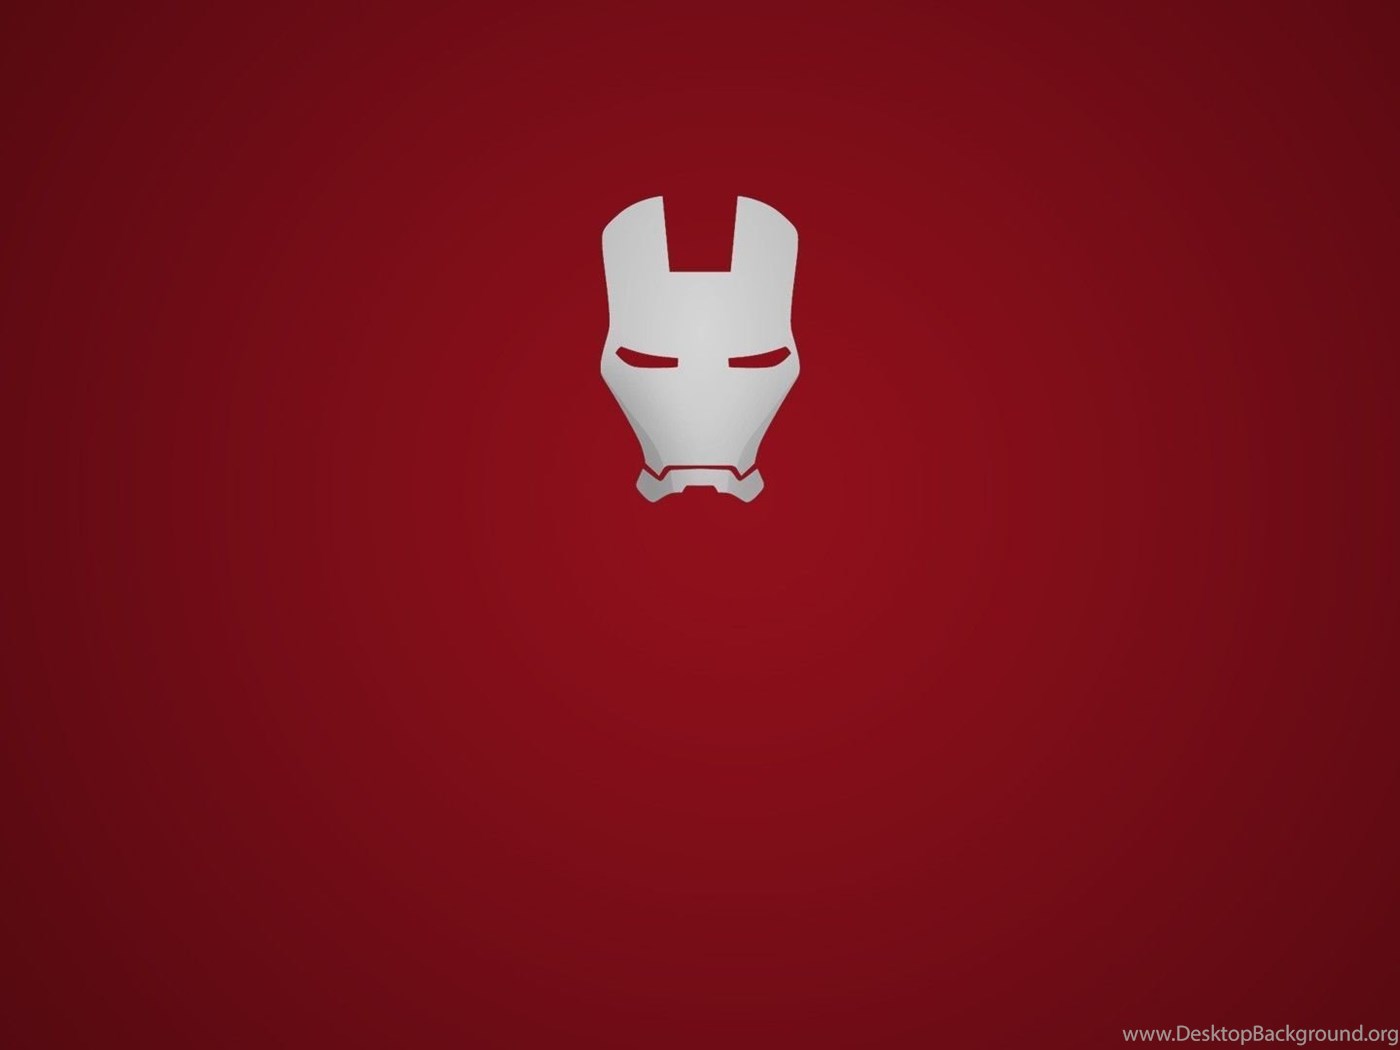 Iron Man Colorful Wallpapers